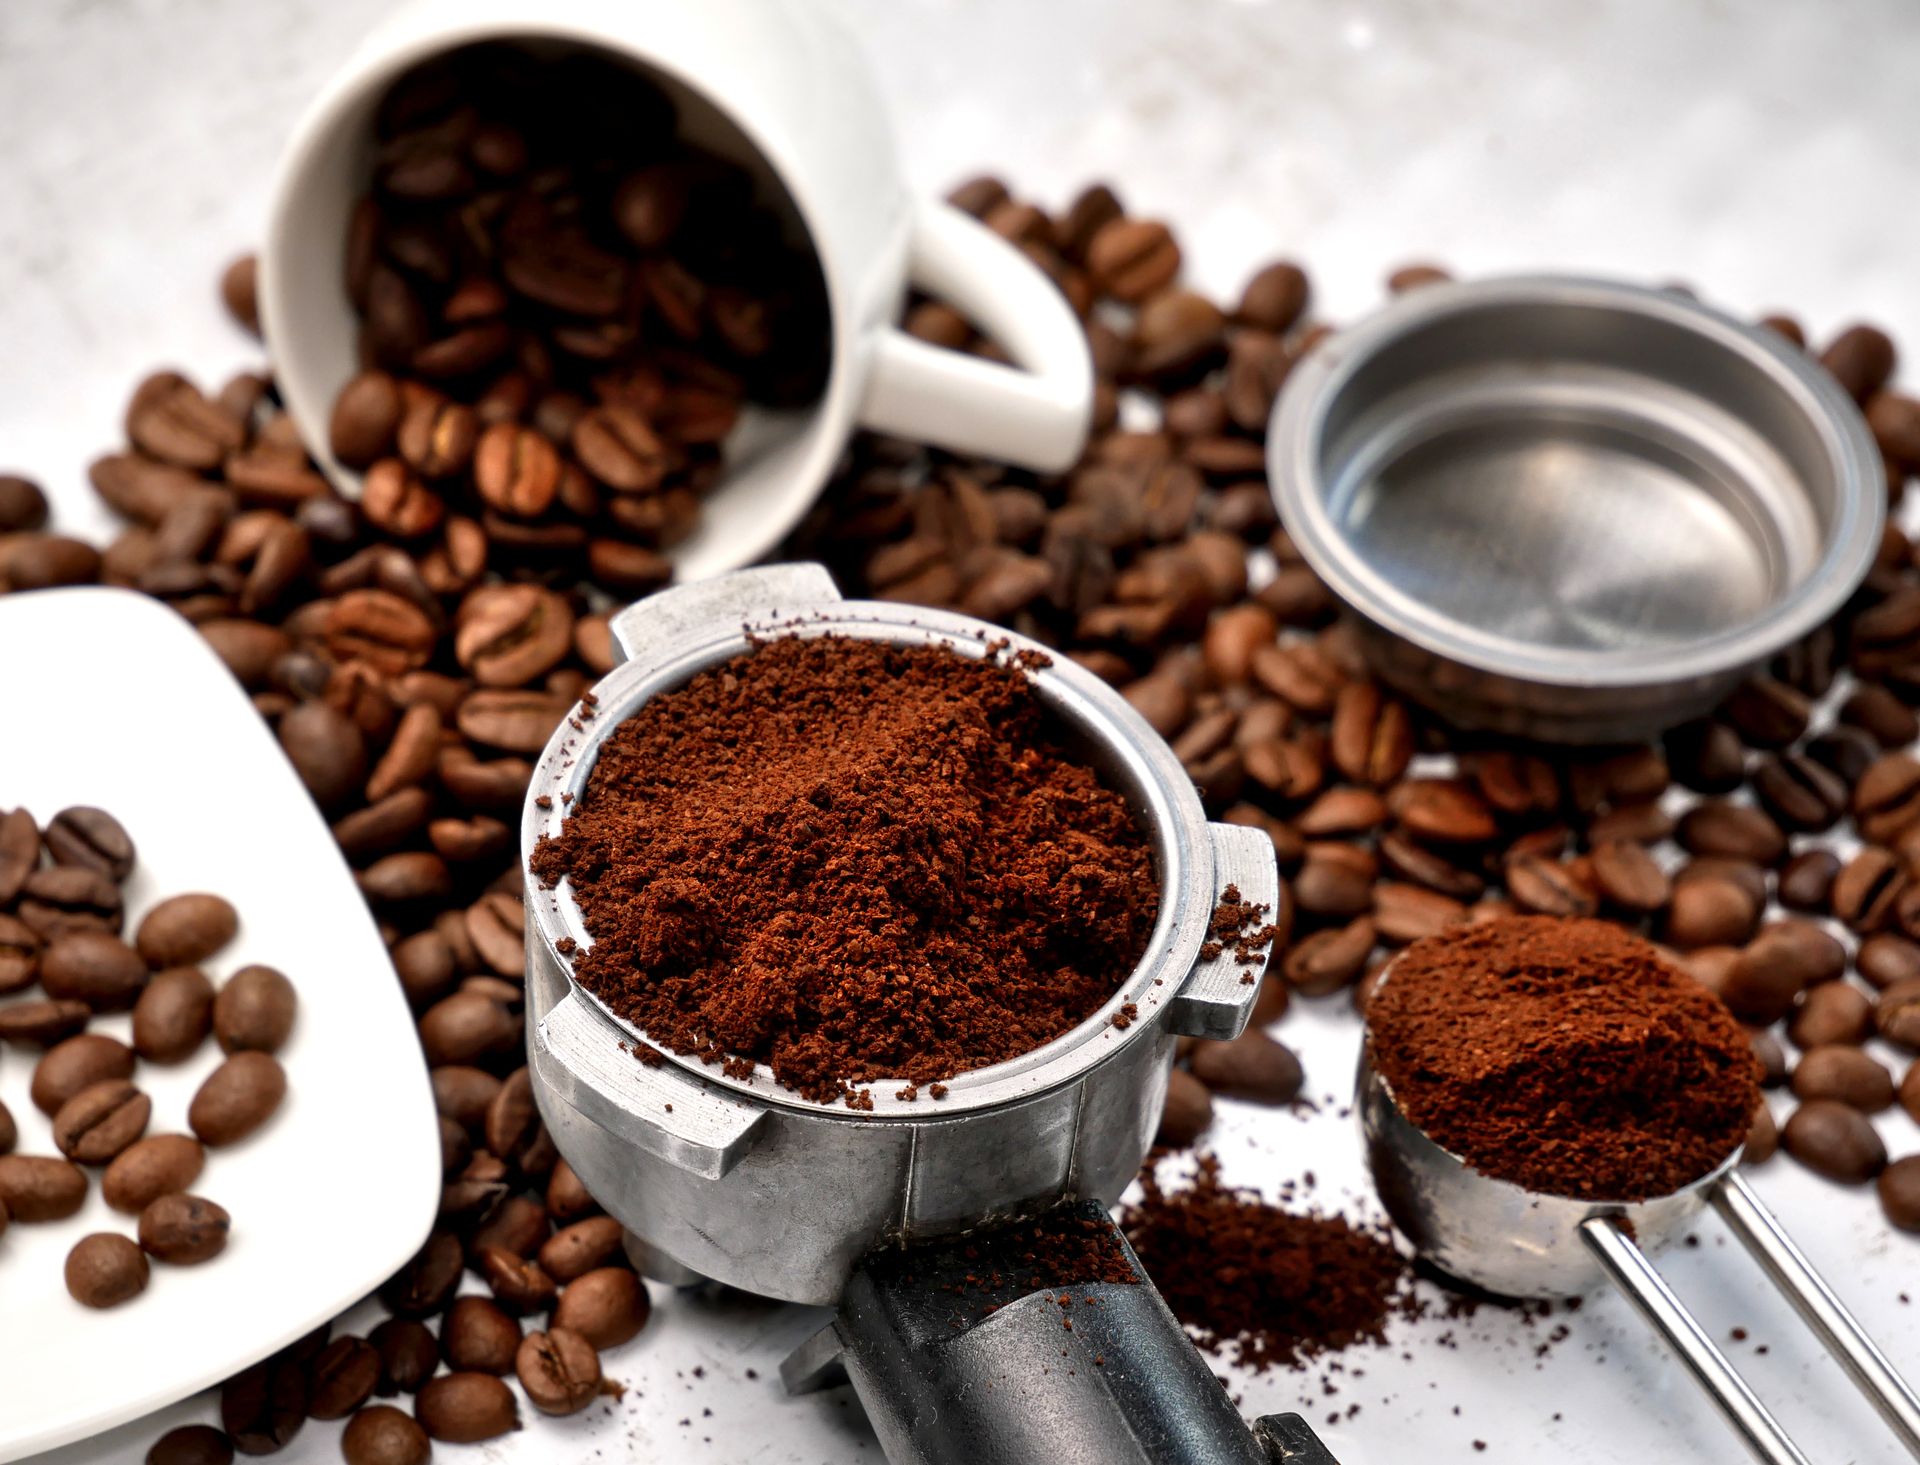 An image showcasing roasted coffee beans and grounded coffee in a scoop ready for use.